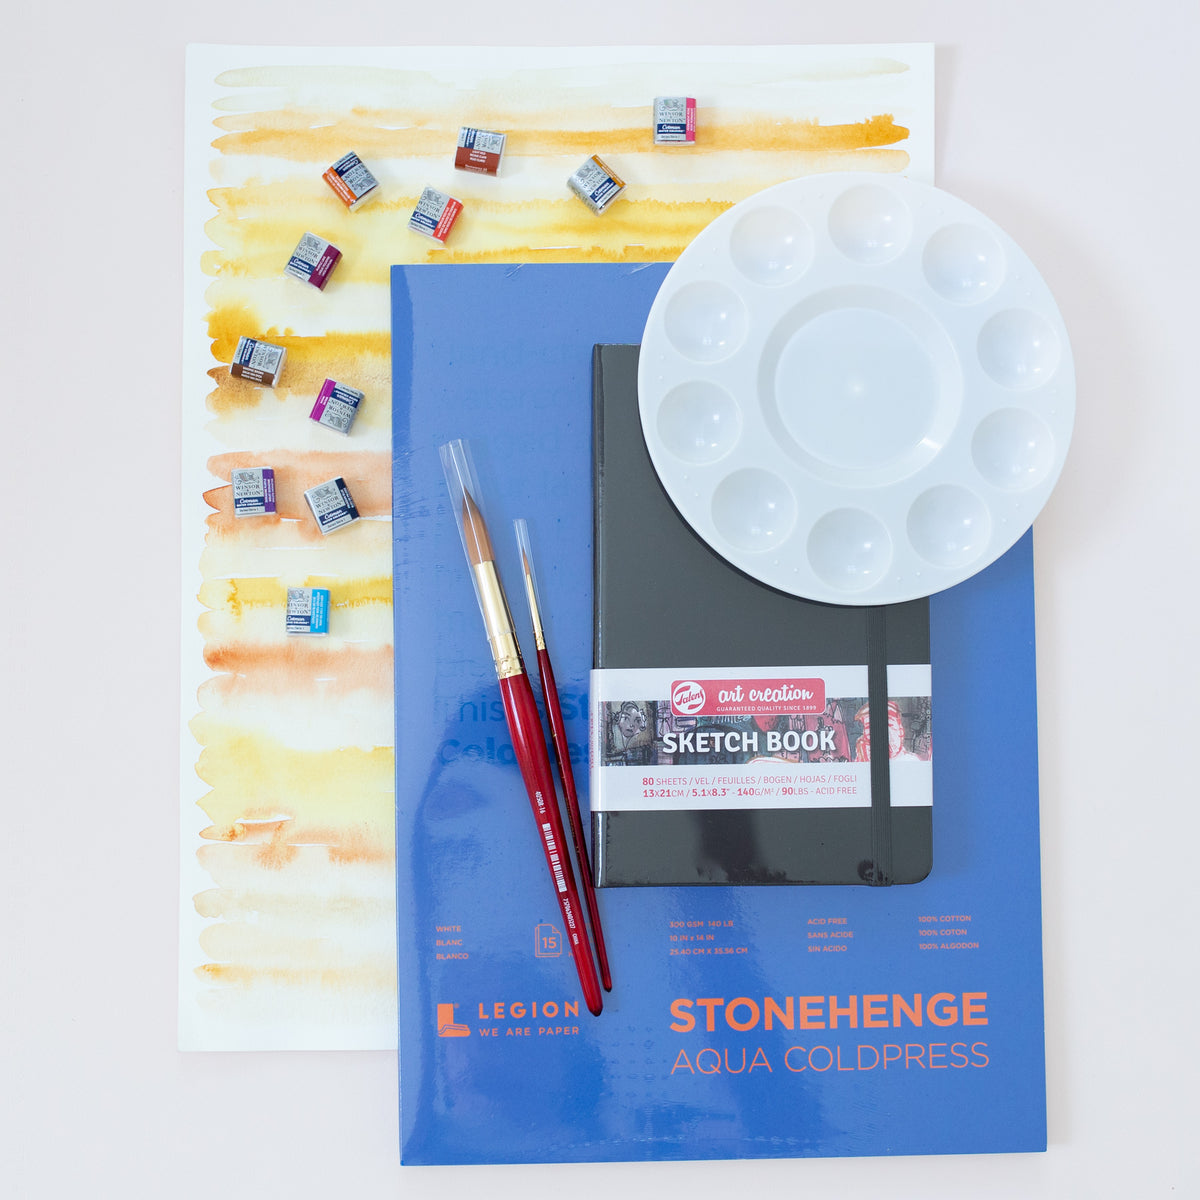 Premium Watercolor set by Marion from Studio Cremers